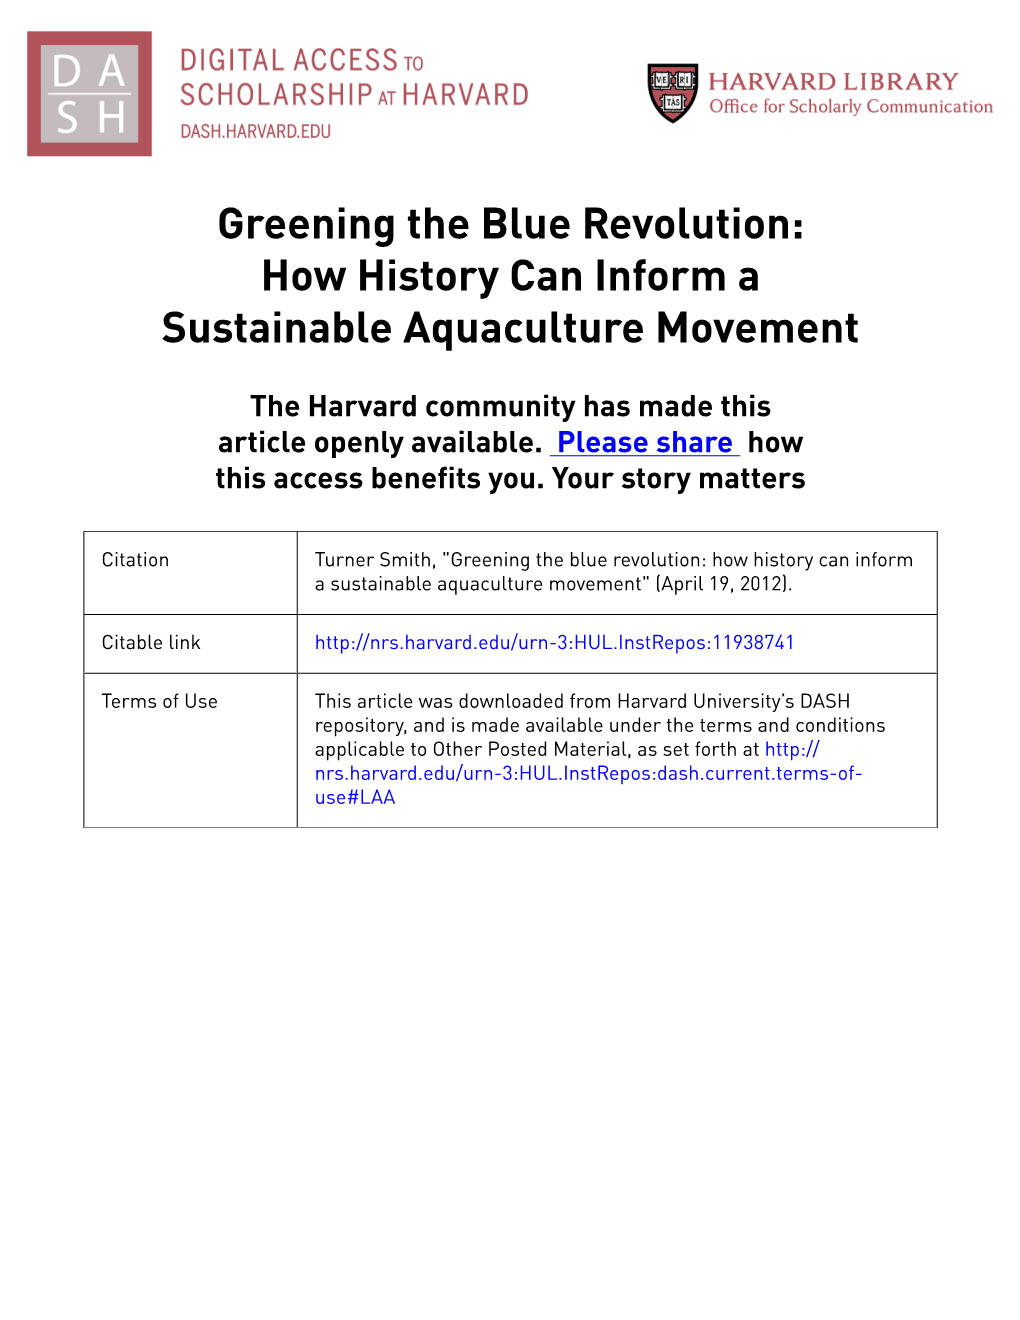 Greening the Blue Revolution: How History Can Inform a Sustainable Aquaculture Movement